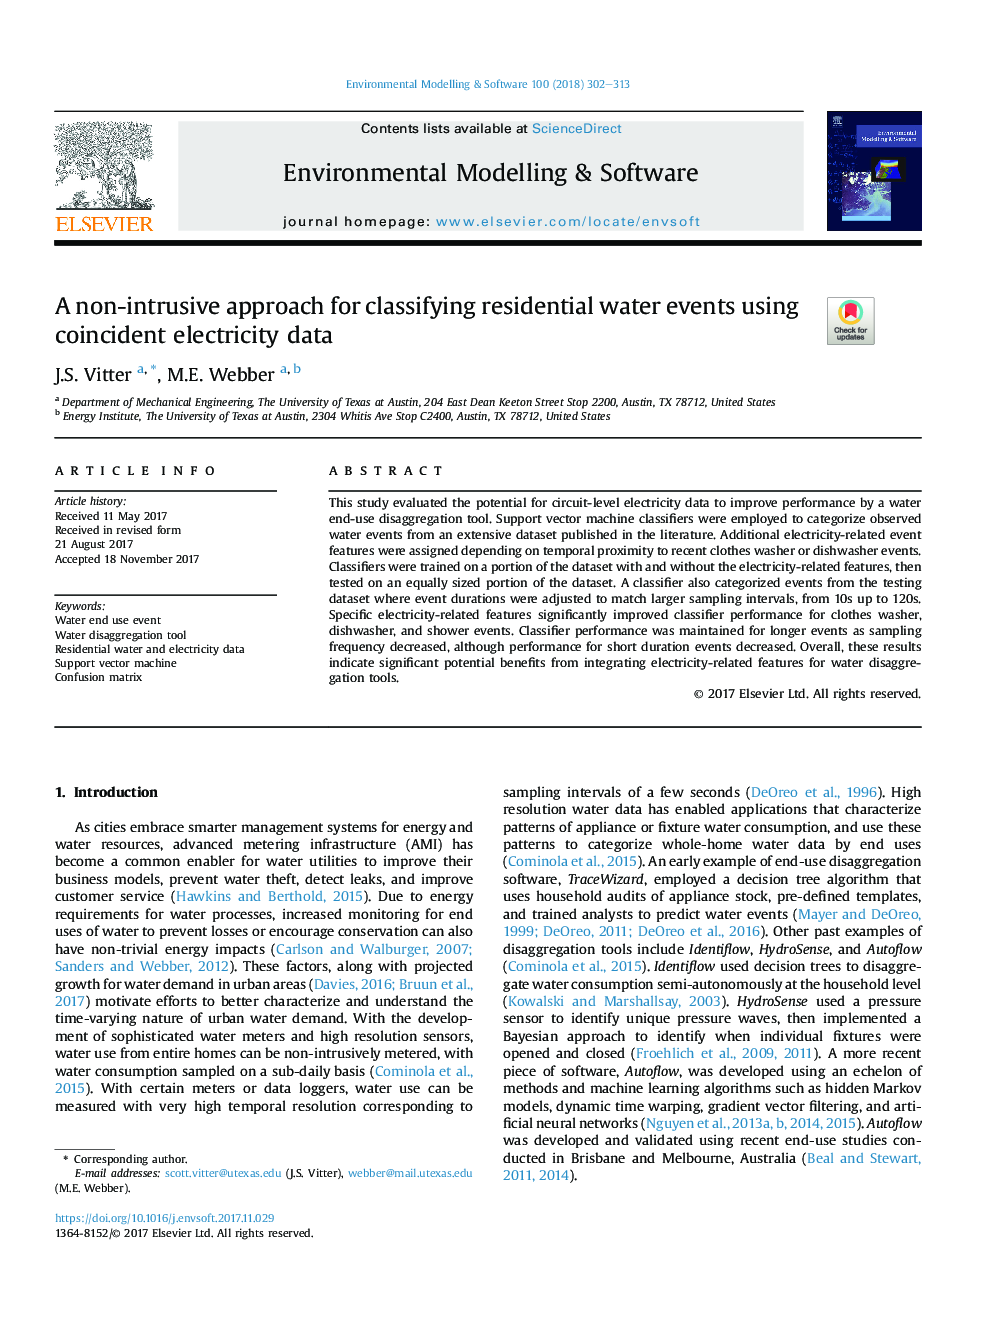 A non-intrusive approach for classifying residential water events using coincident electricity data